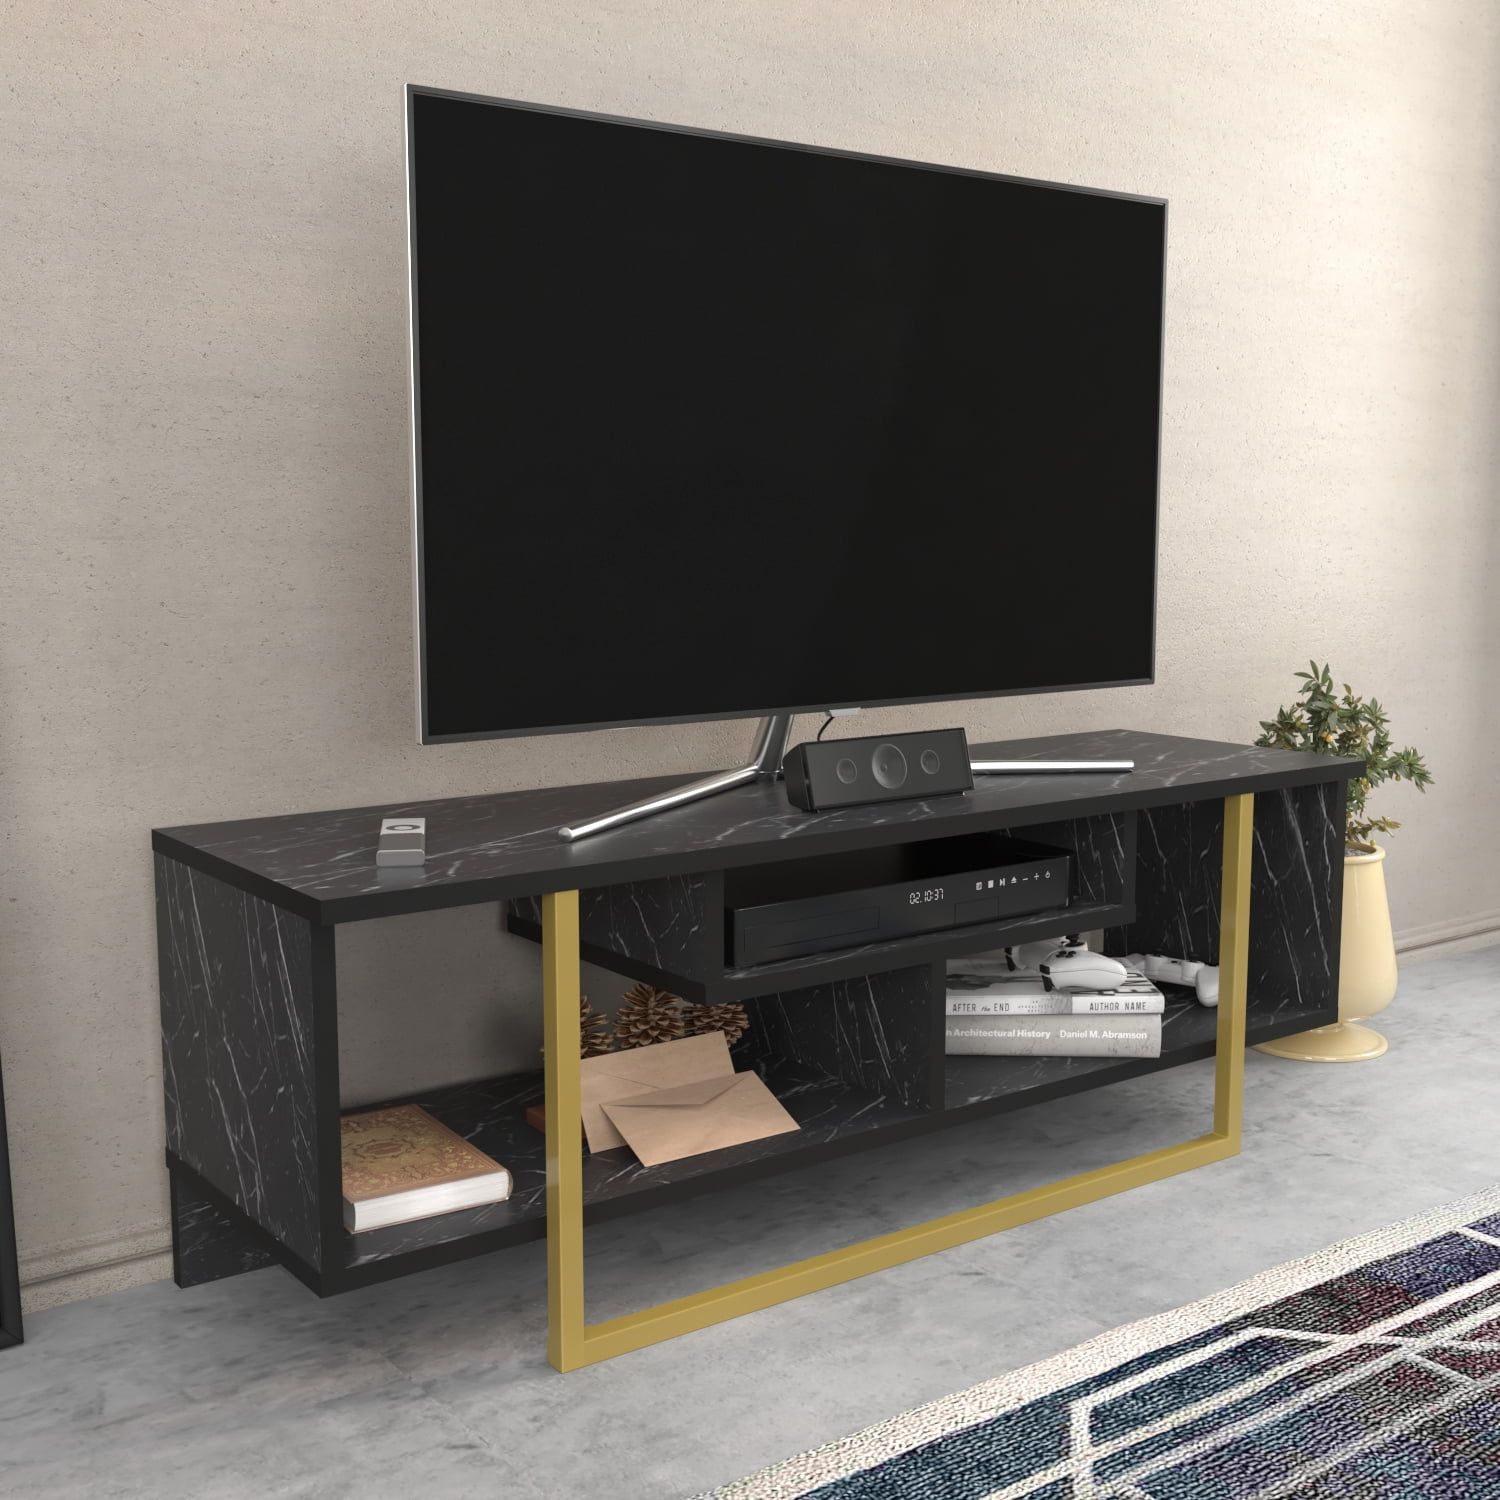 Asal 47" Modern Metal Wood Tv Stand For 55 Inch Tv Black Marble Gold In Black Marble Tv Stands (Gallery 5 of 20)